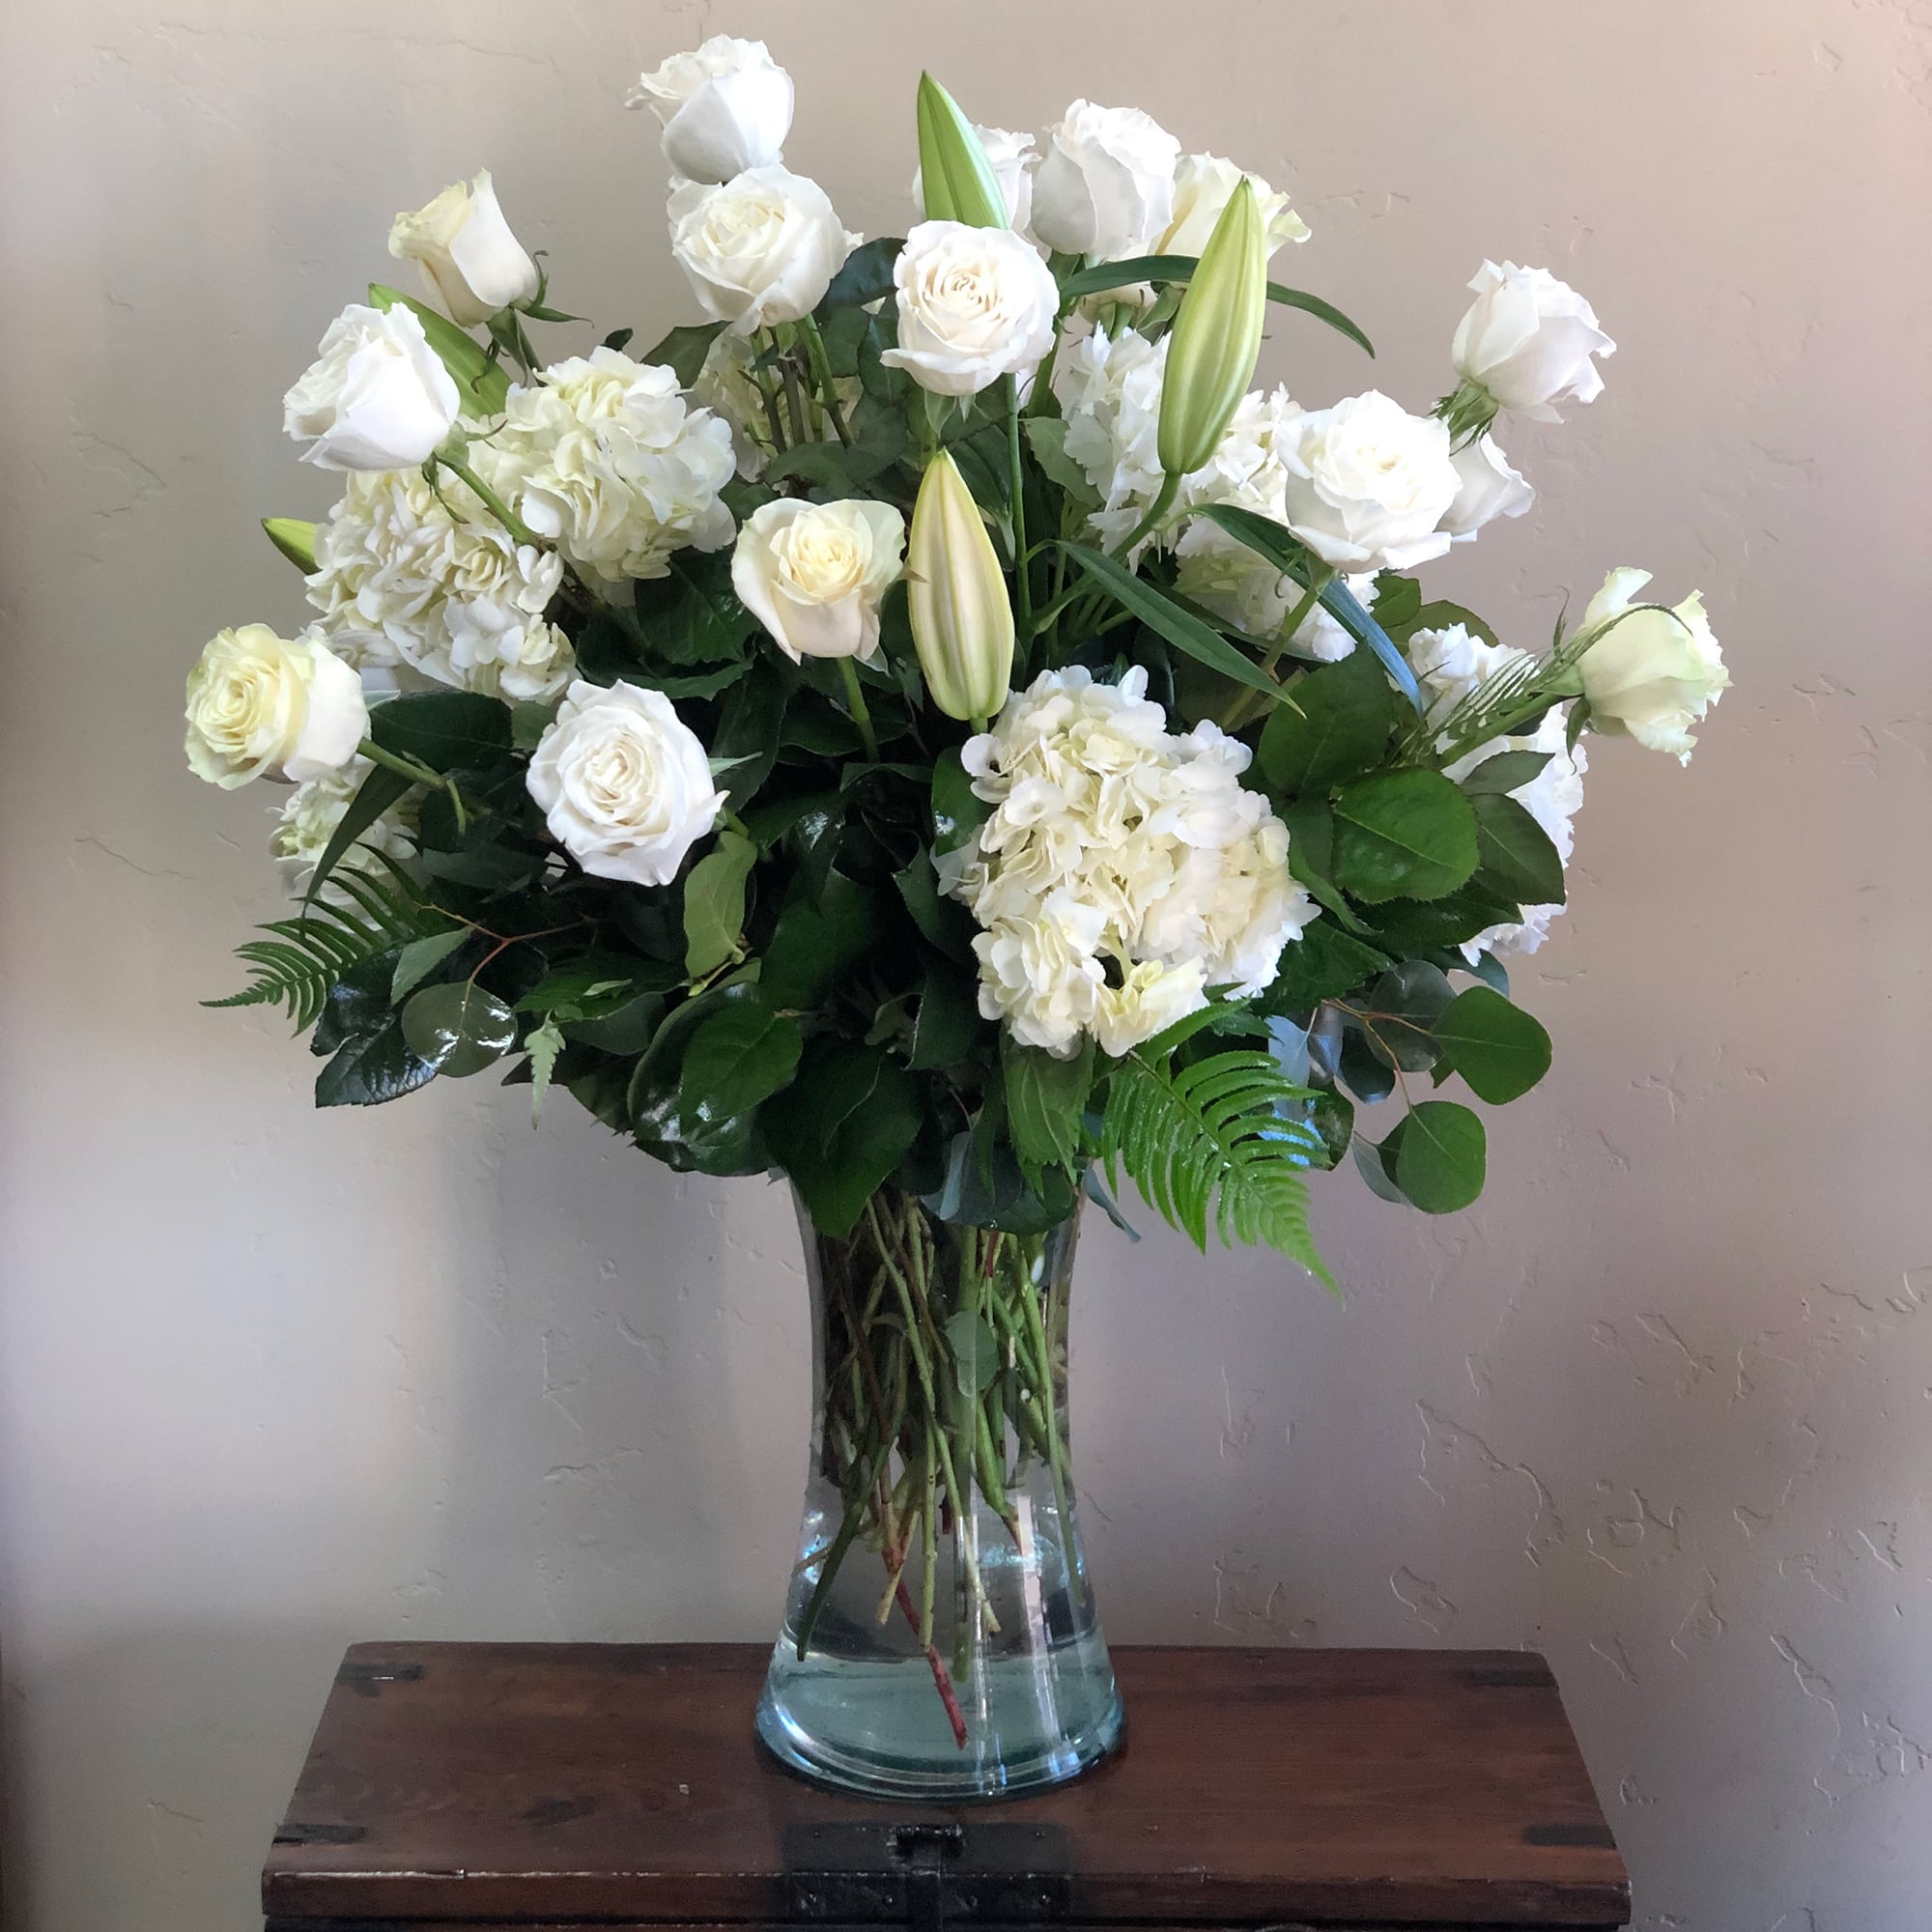 White flowers with greens in a vase